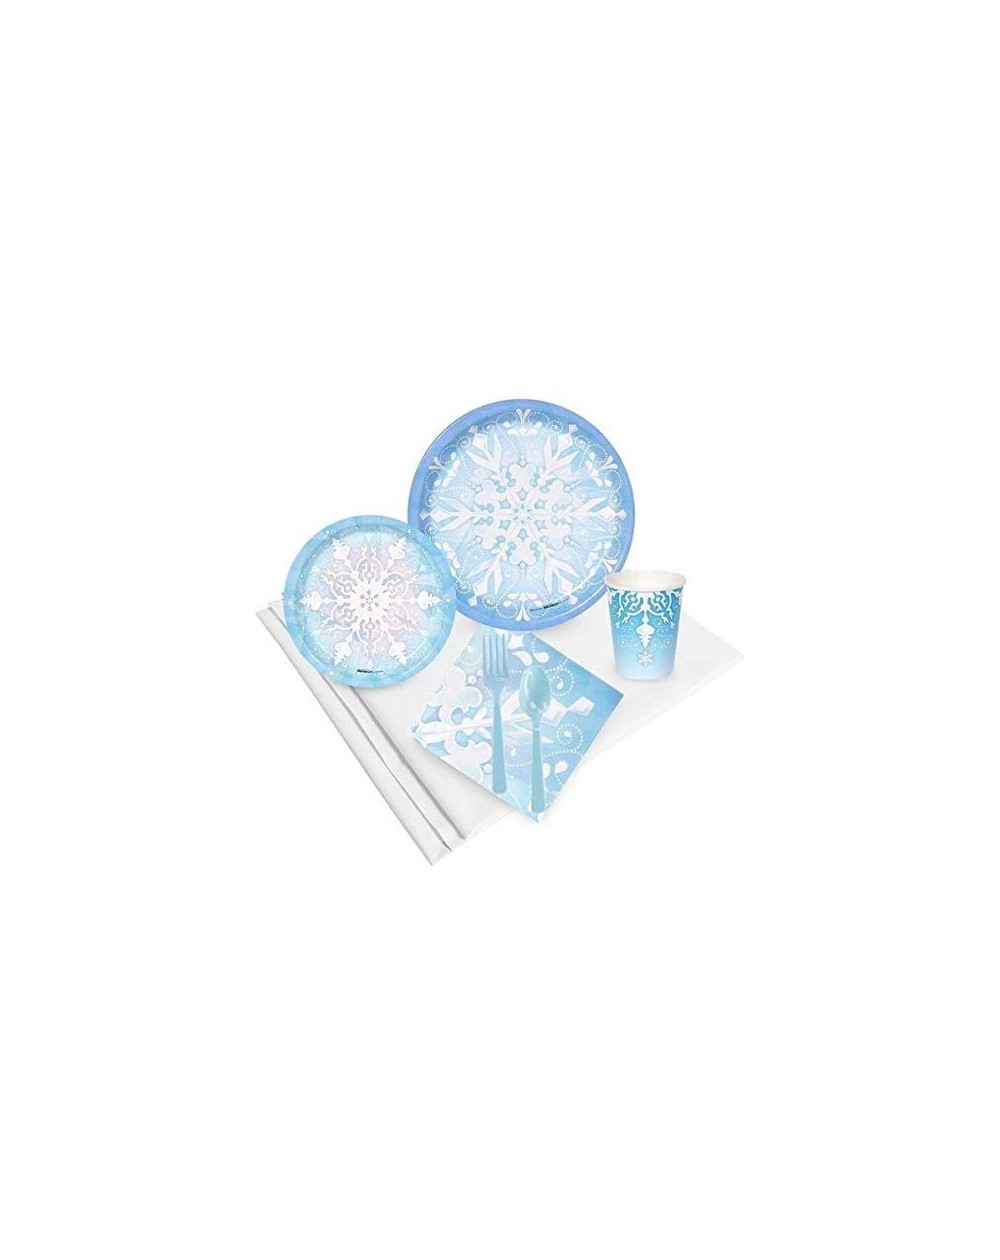 Party Packs Snowflake Winter Wonderland Party Supply Pack for 24 Guests - CH12O9TQQGF $24.02